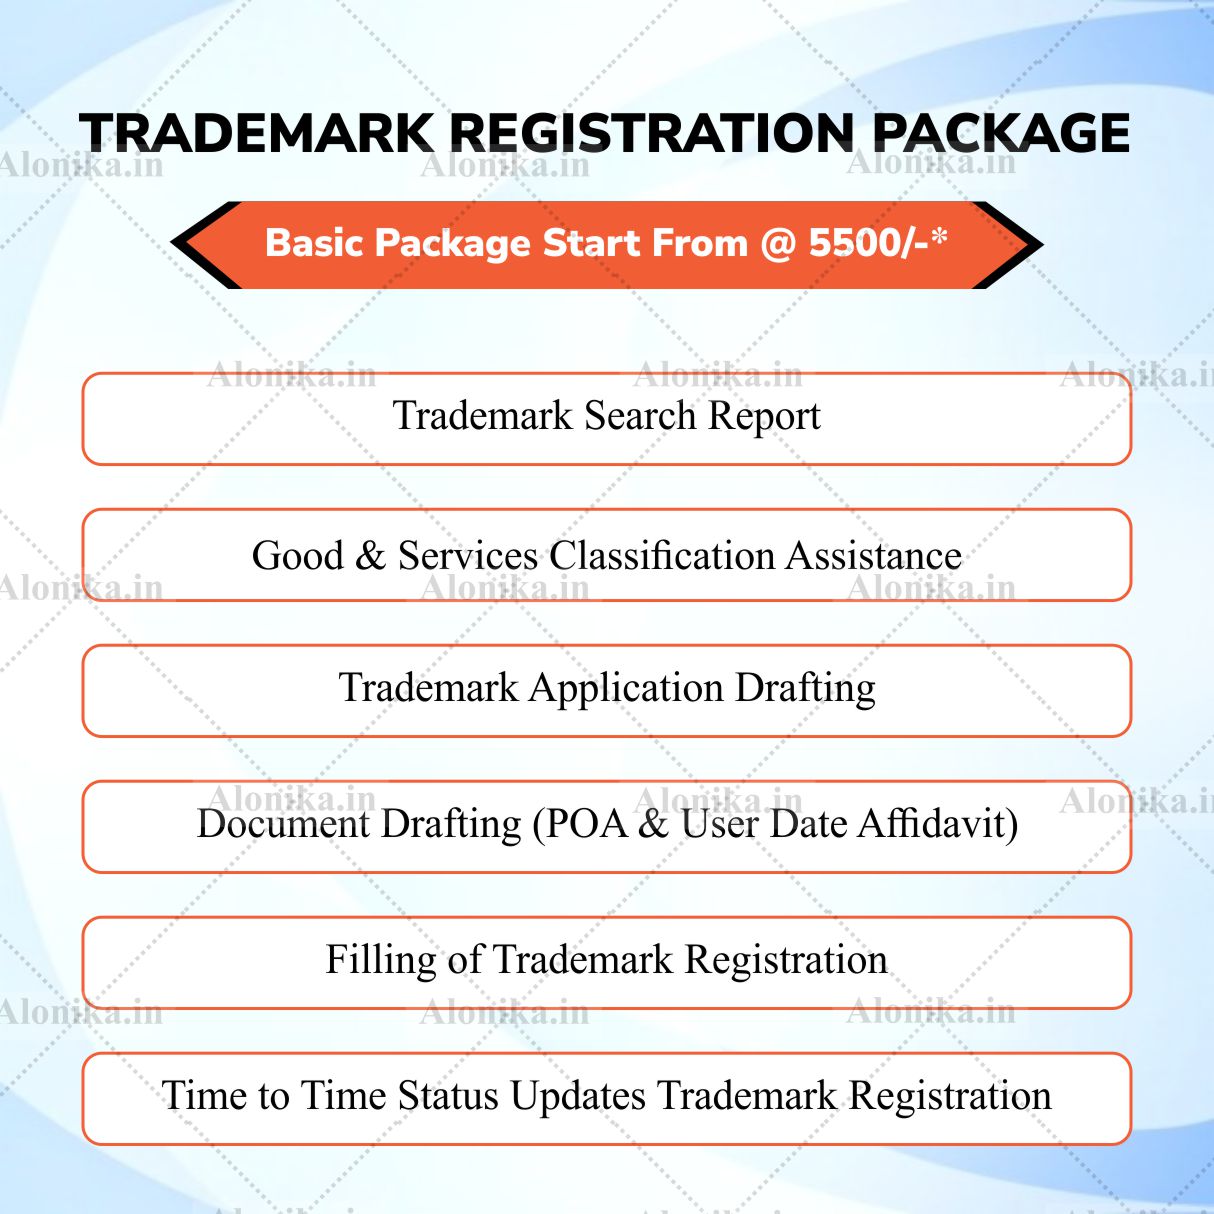 Why is trademark registration crucial for businesses in Mumbai?